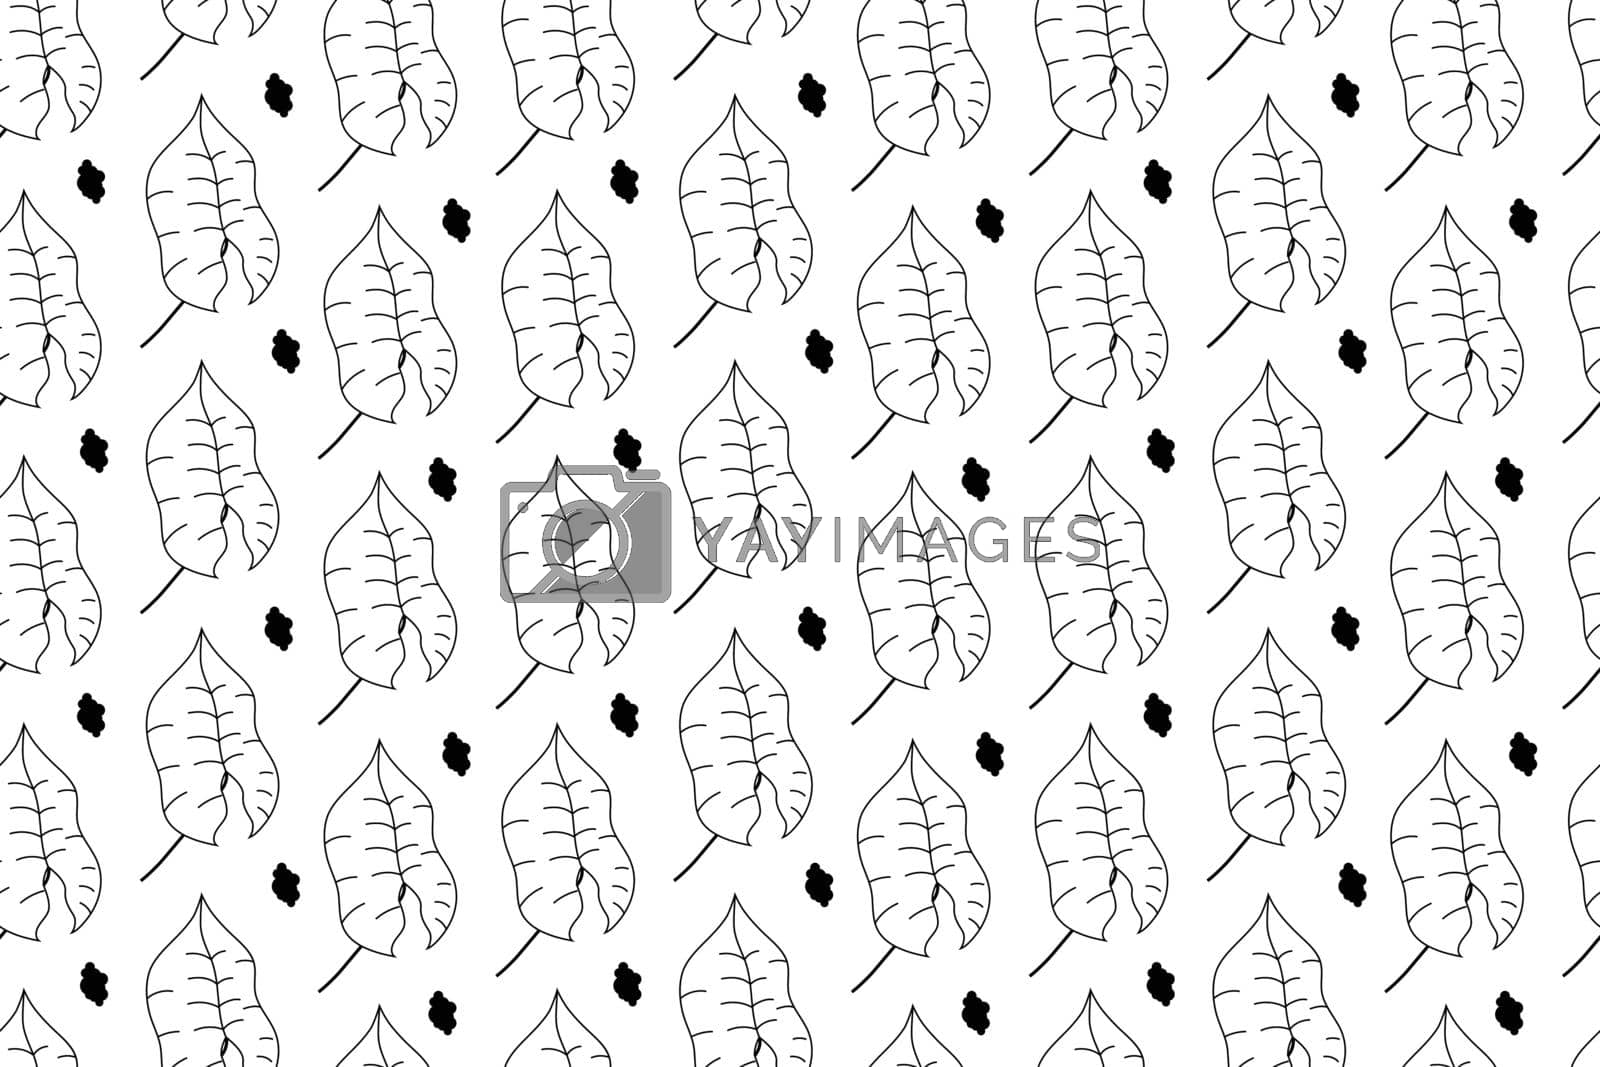 Outline handdrawn seamless pattern. Autumn theme, sycamore leaf silhouettes on white backdrop. Ready for fashion, textile and wallpaper. Vector illustration